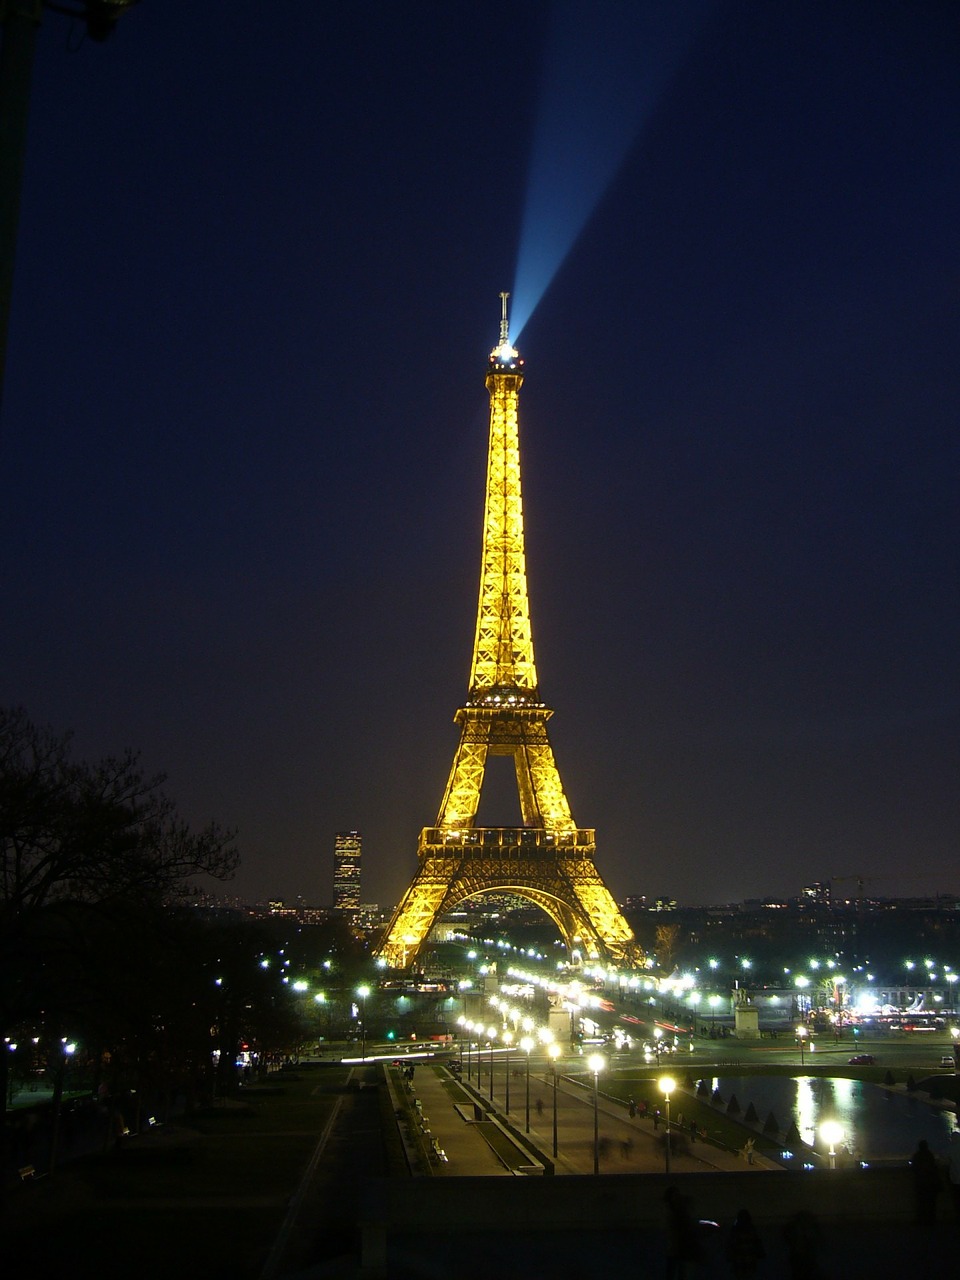 a tall tower lit up at night with Eiffel Tower in the background